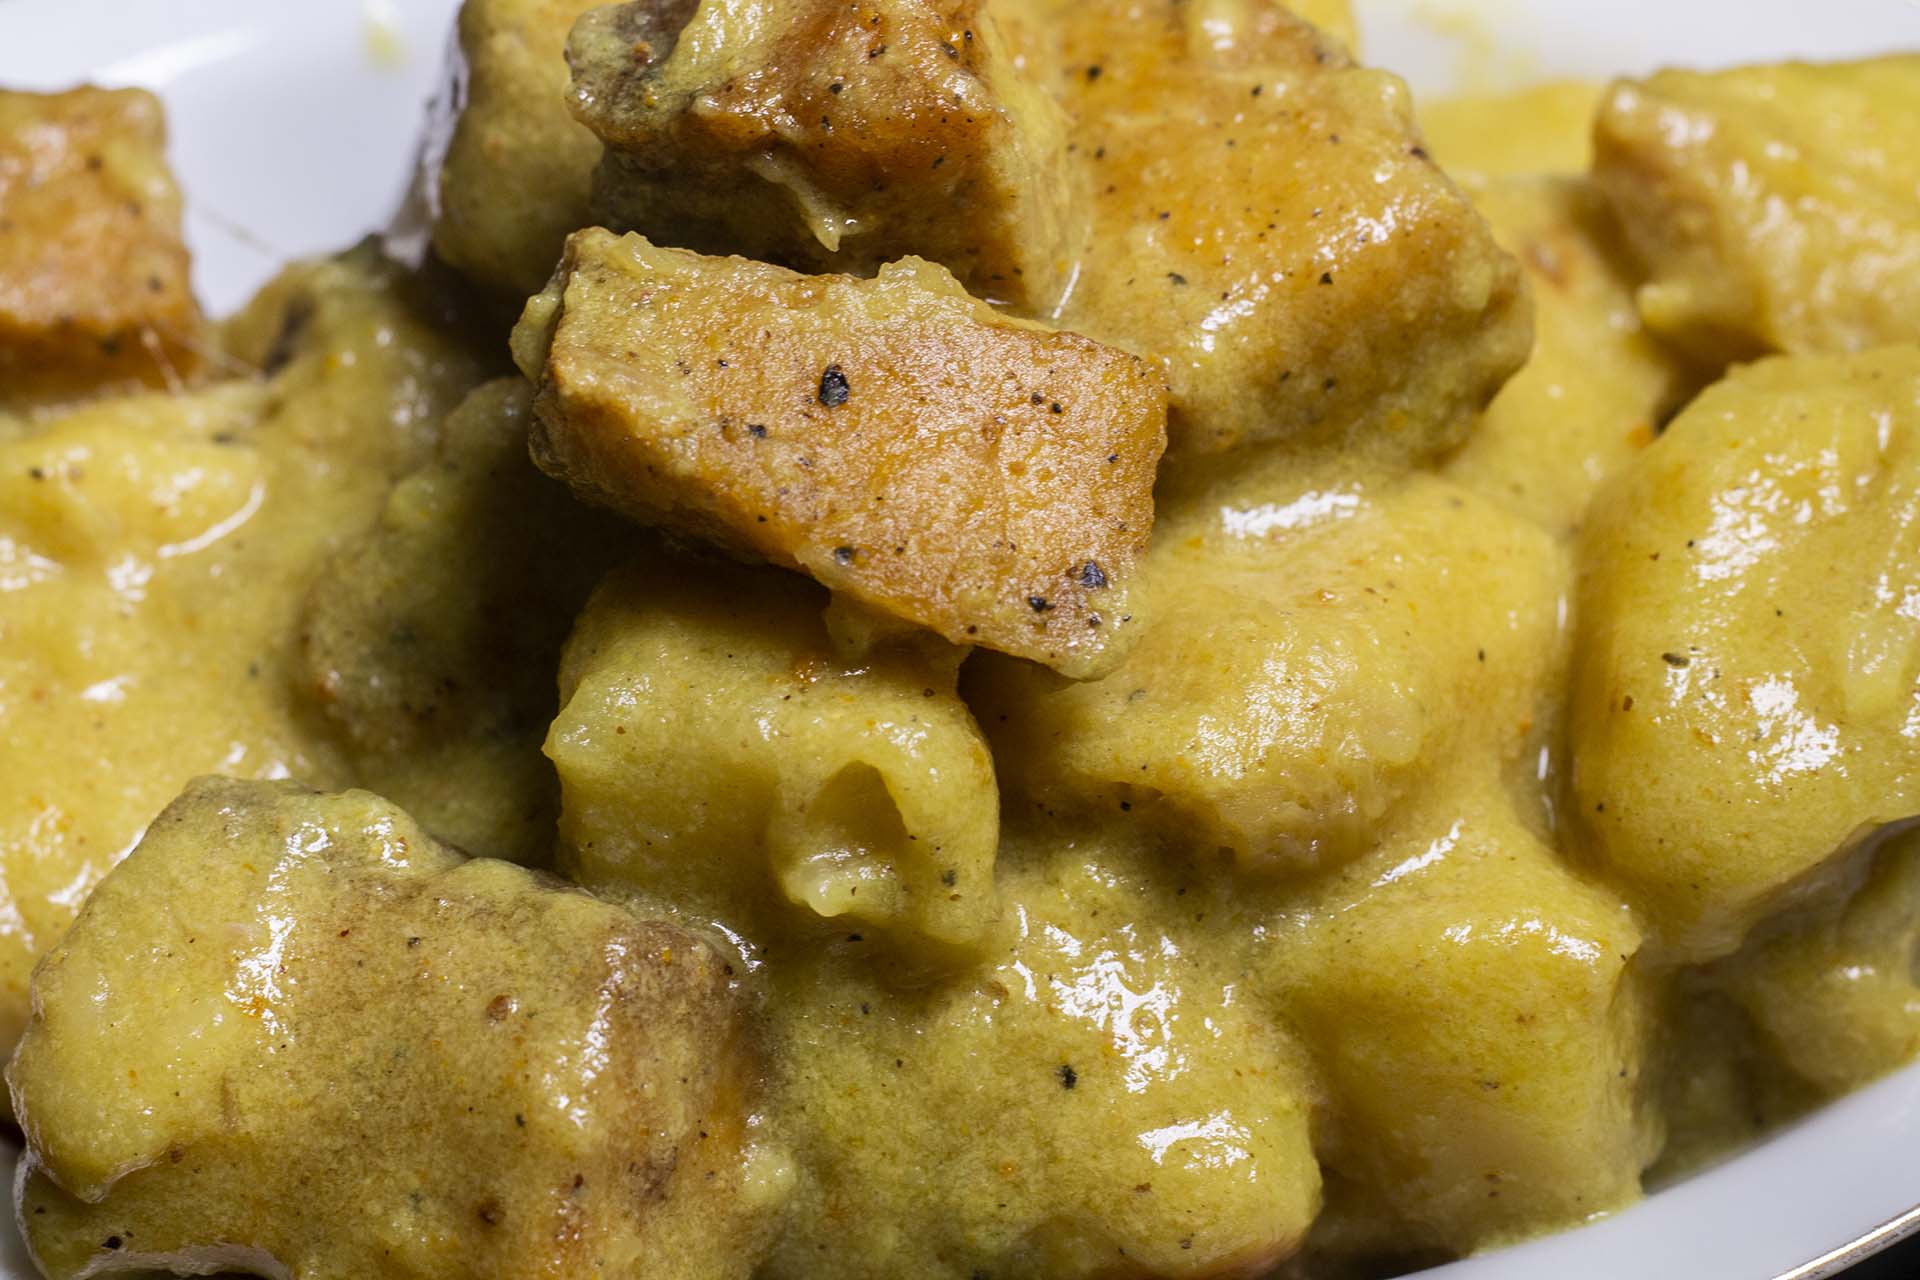 Breadfruit curry with fish